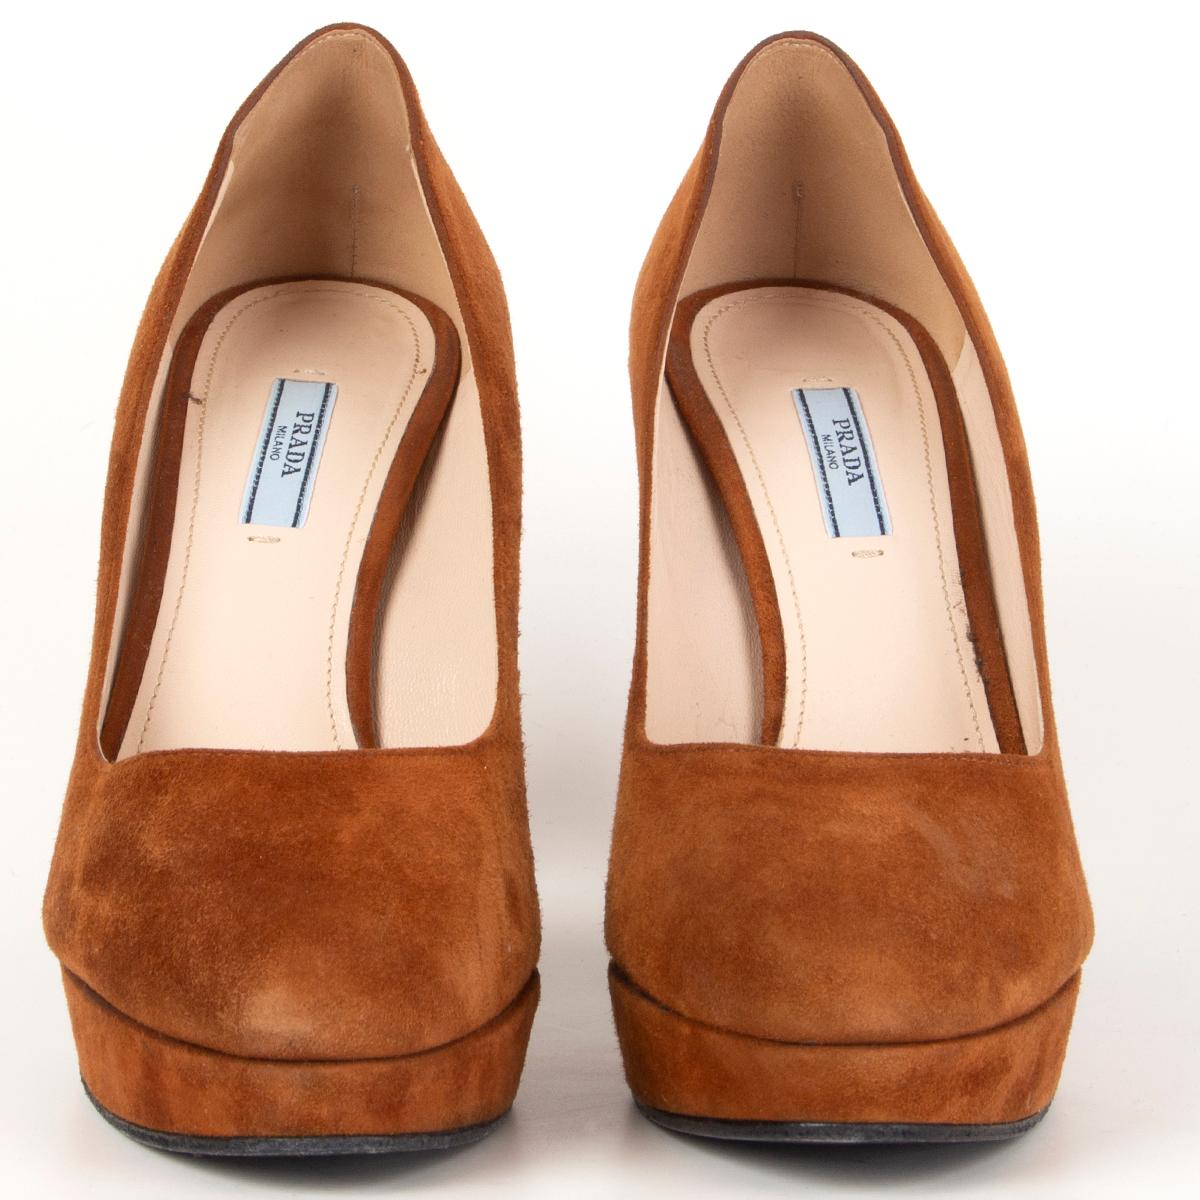 100% authentic Prada platform pumps in cognac suede. Have been worn and are in excellent condition. 

Measurements
Imprinted Size	40.5
Shoe Size	40.5
Inside Sole	27cm (10.5in)
Width	8cm (3.1in)
Heel	12cm (4.7in)
Platform:	2.5cm (1in)

All our